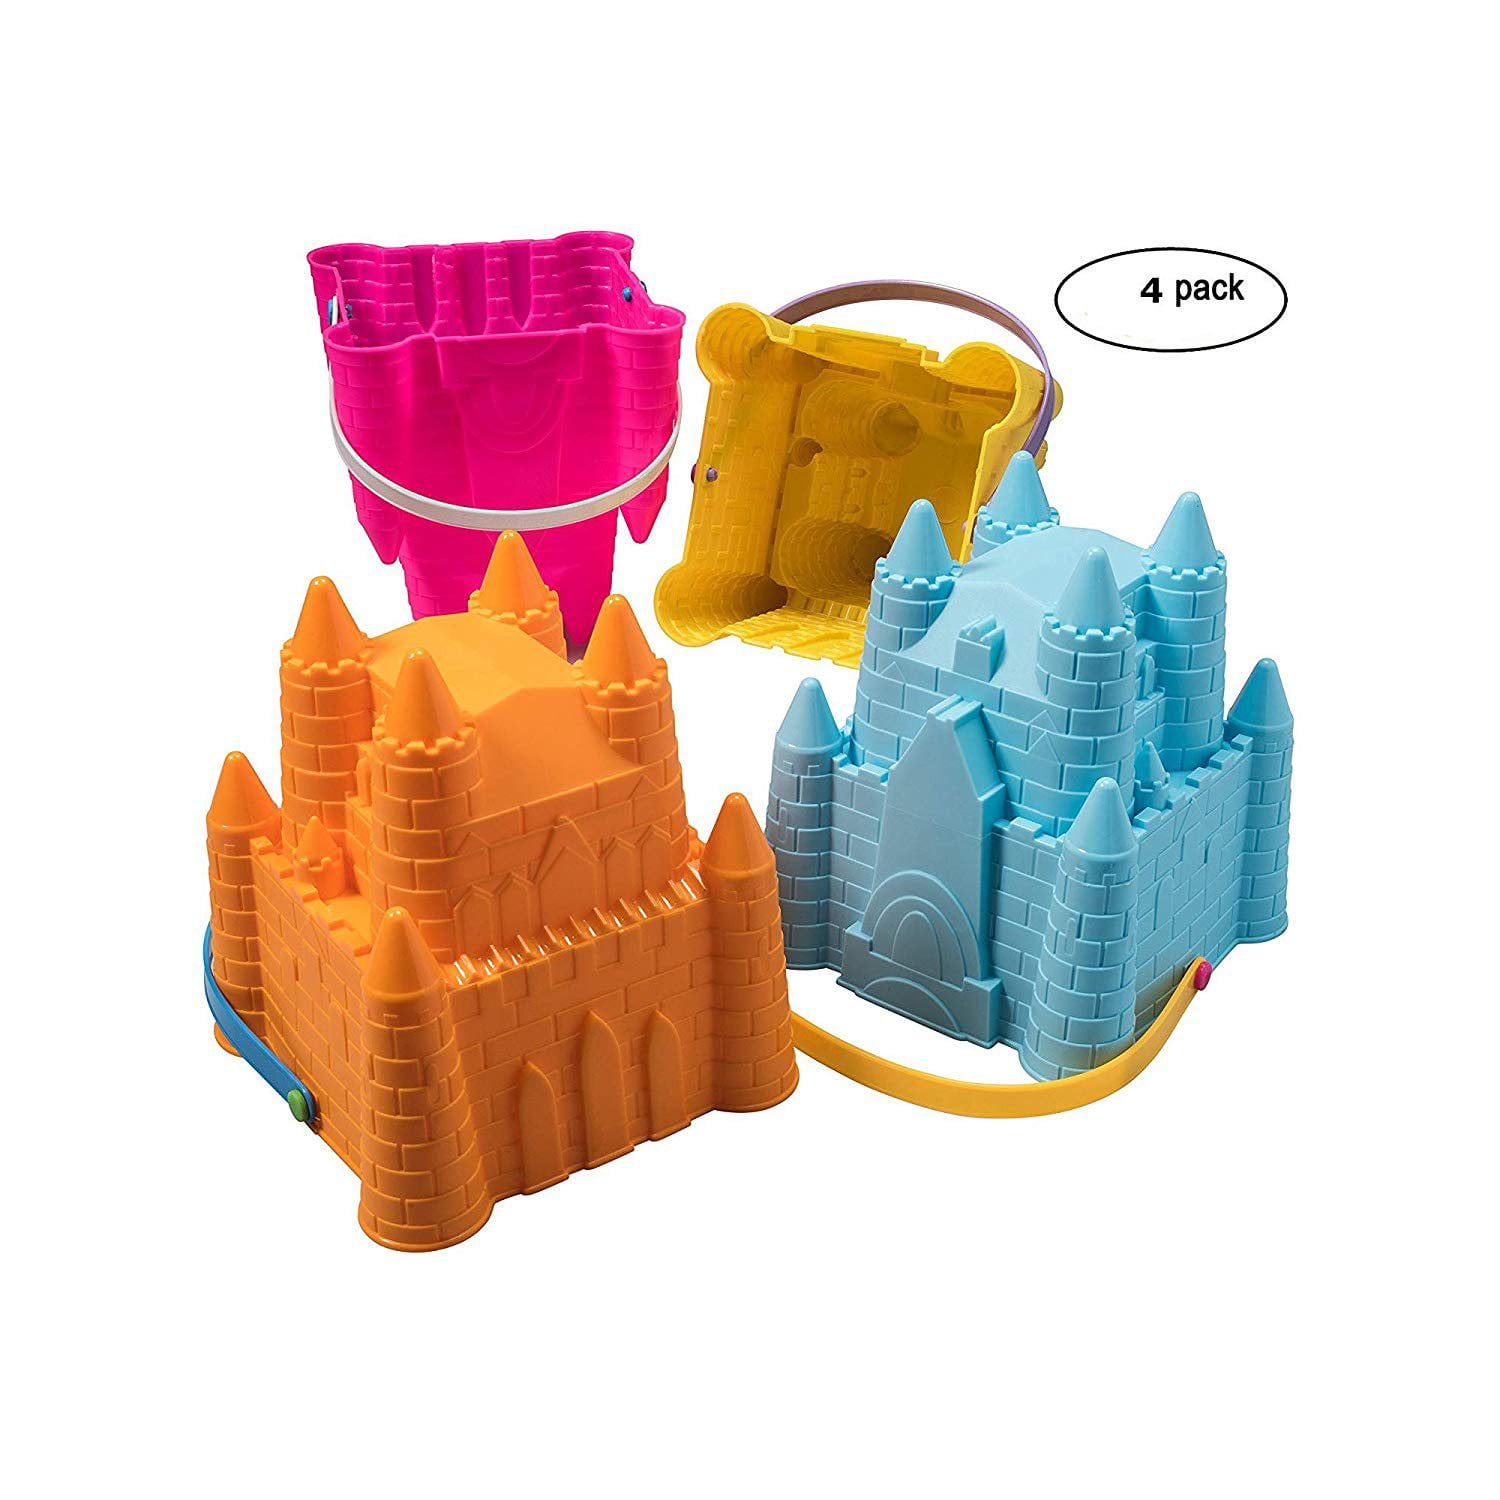 3 Pack Castle Model Beach Sand Buckets 7 Large Snow Castle Maker Pails Water Pool Gardening Bath Toy ABS Durable Thick Plastic Gift Bucket Set For Camping Traveling Cleaning Summer Beach Pool Party 